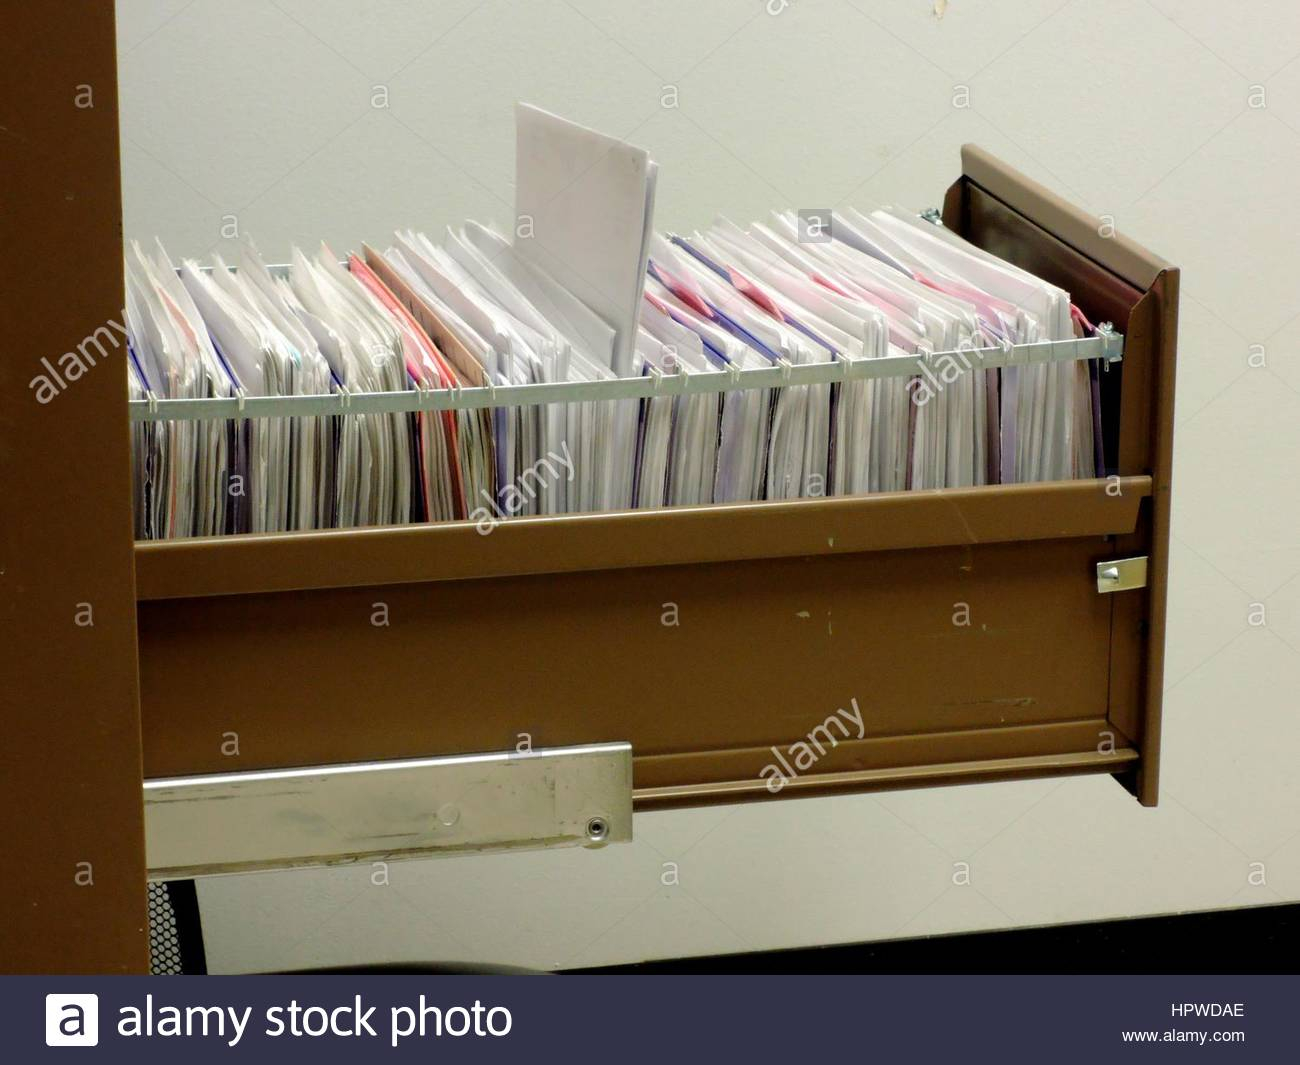 Metal File Cabinet With Hanging File Folders Stock Photo 134554294 for dimensions 1300 X 1065